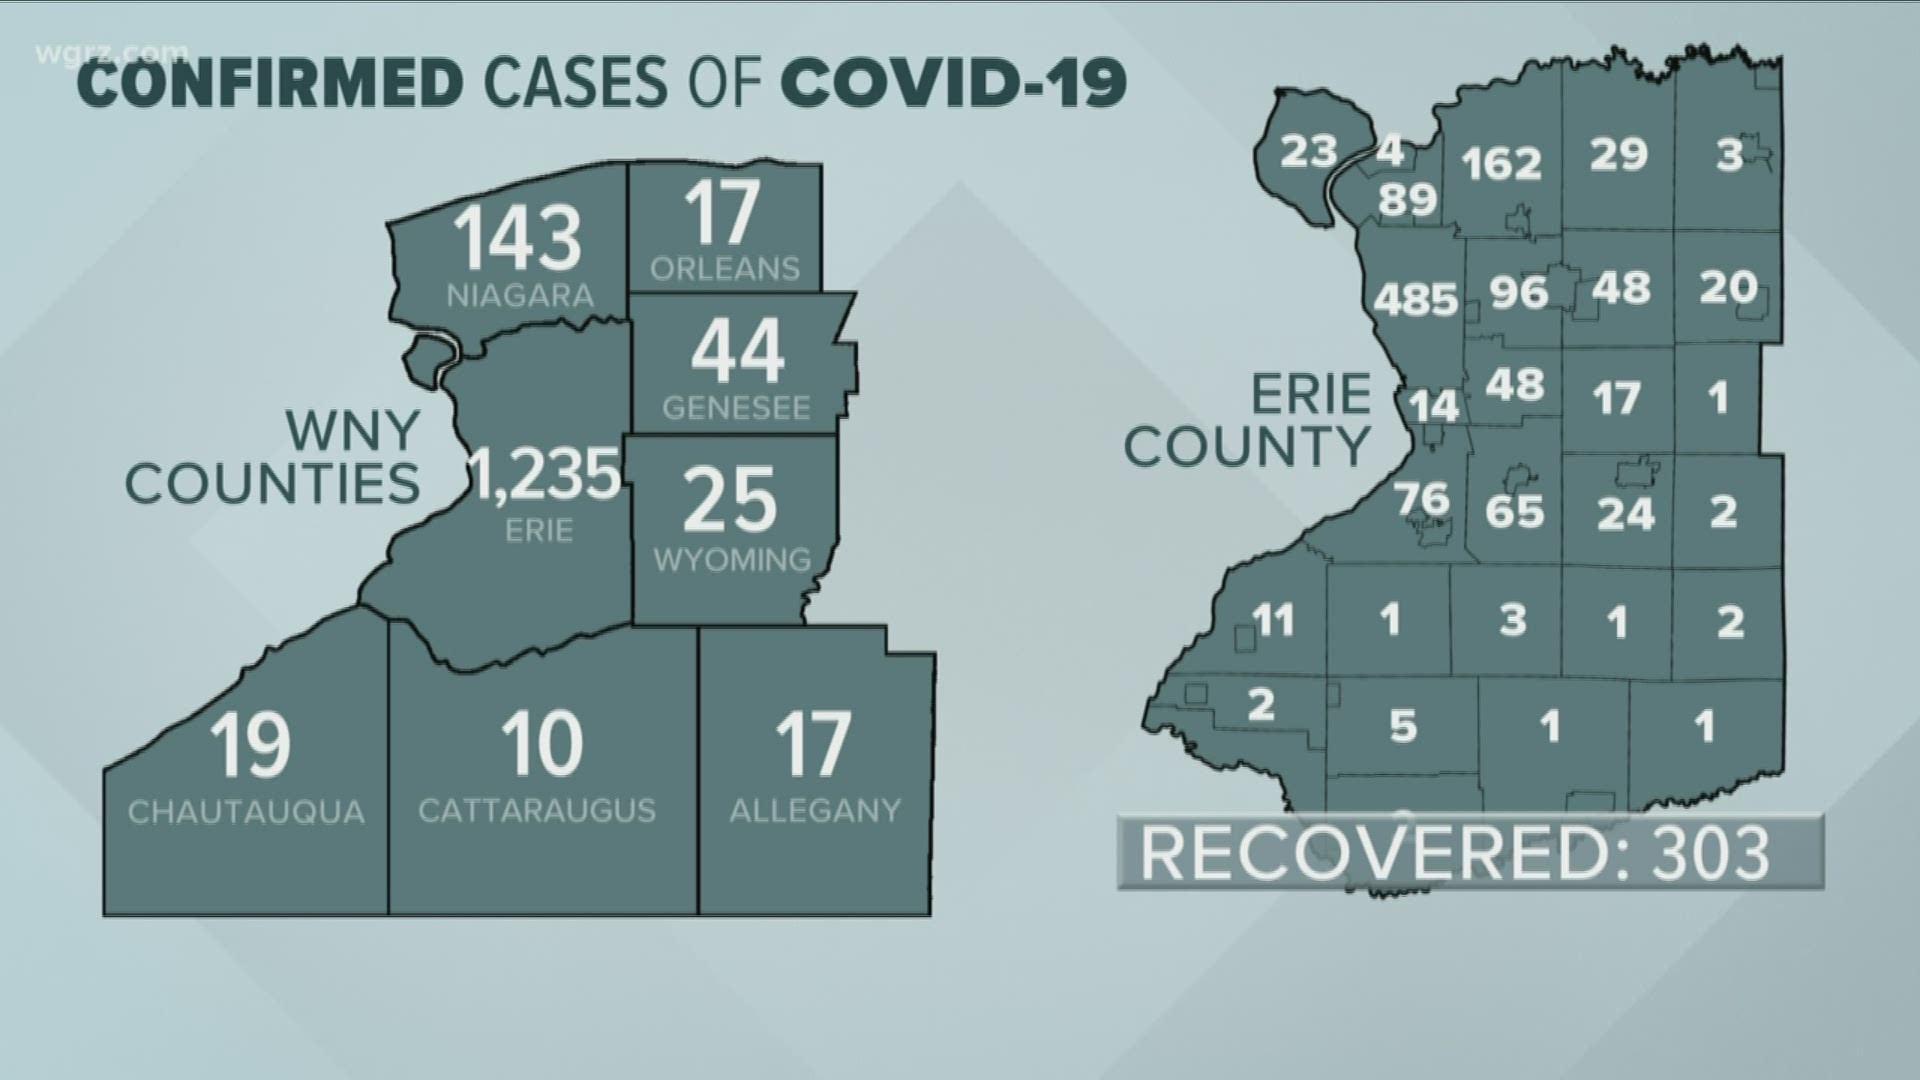 The number of Covid-19 deaths here in Western New York continues to grow. But there is light at the end of the tunnel and we will be here with you.